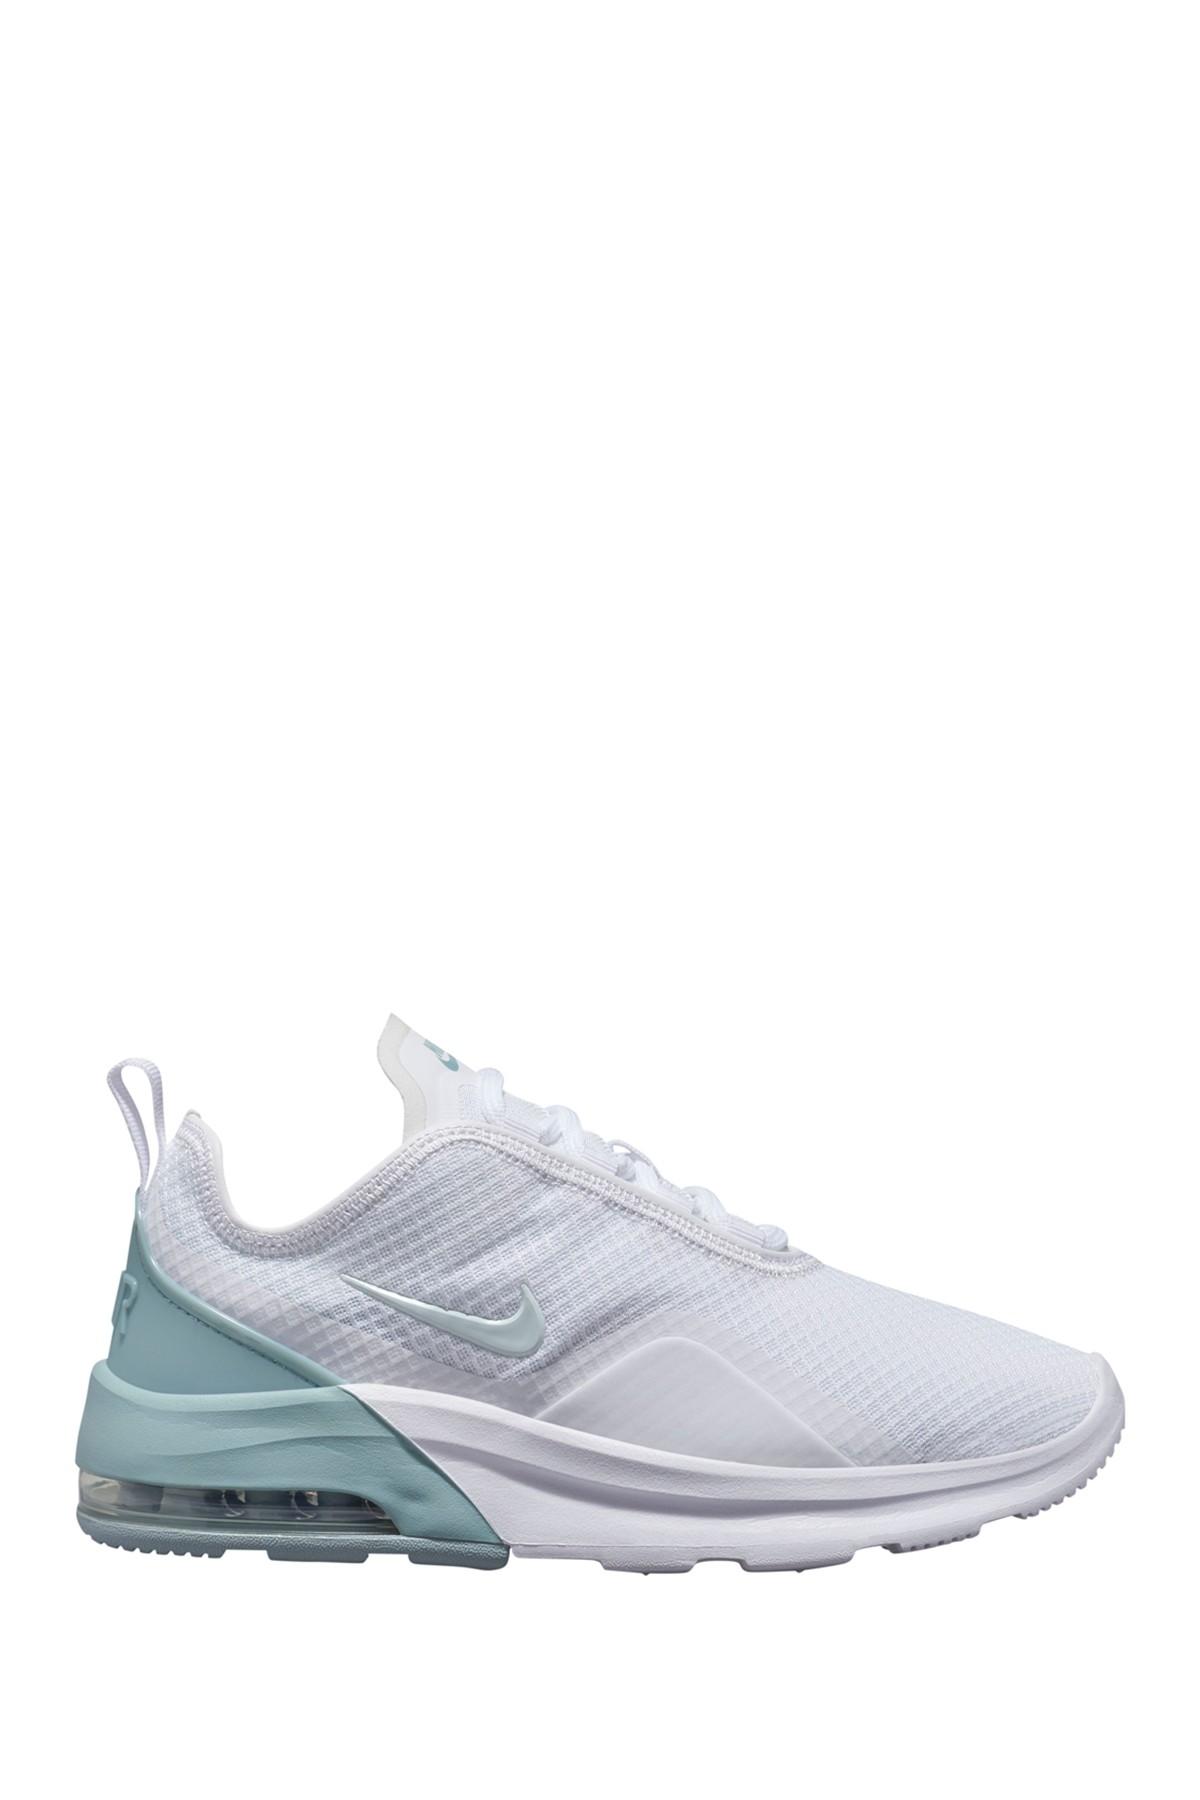 Nike Air Max Motion 2 Athletic Sneaker in White | Lyst